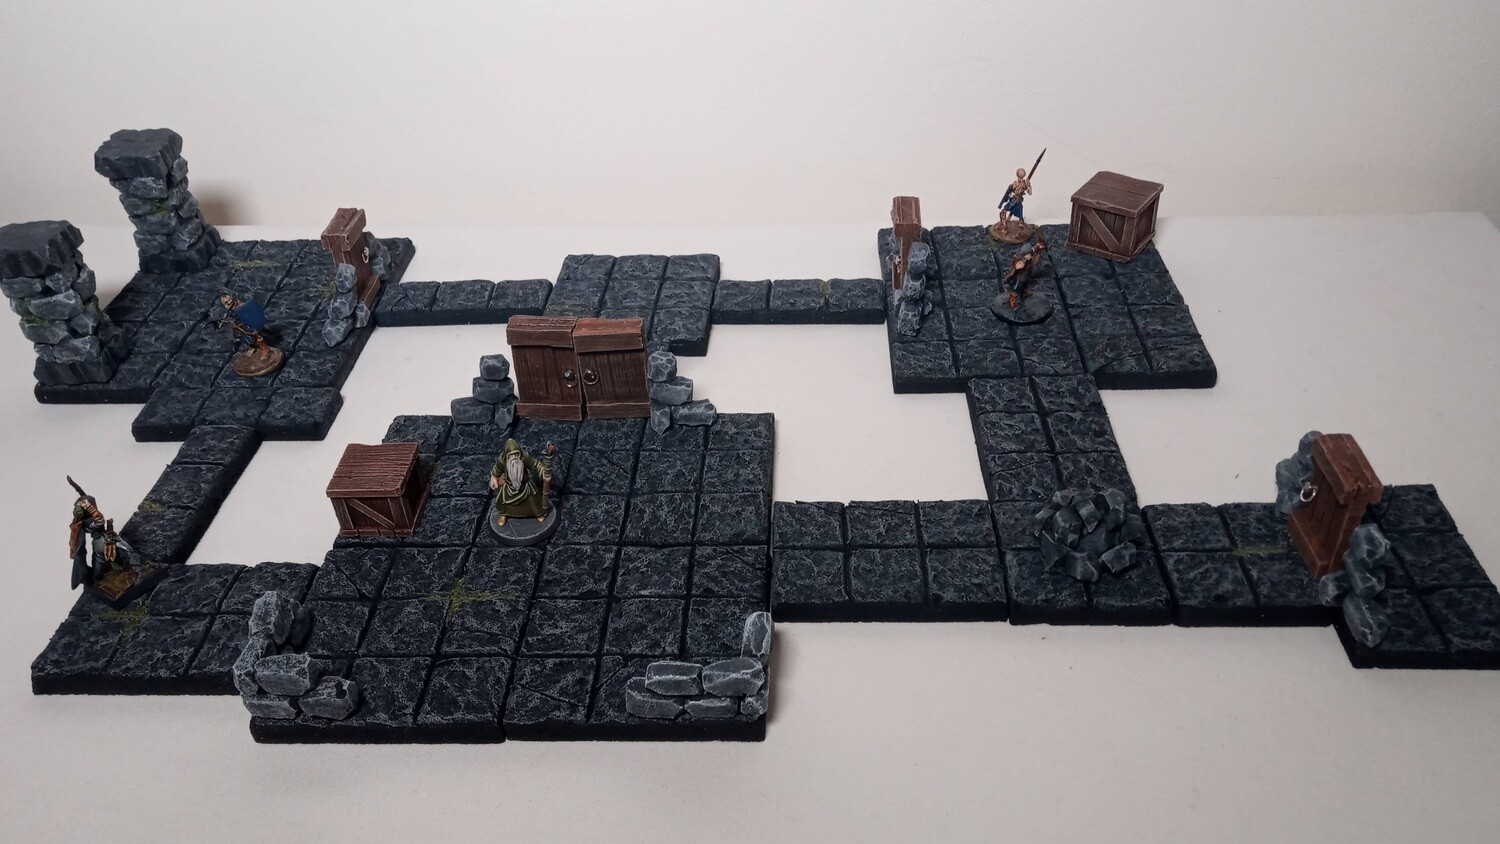 Dungeon, Crypt, Temple & Warehouse sets